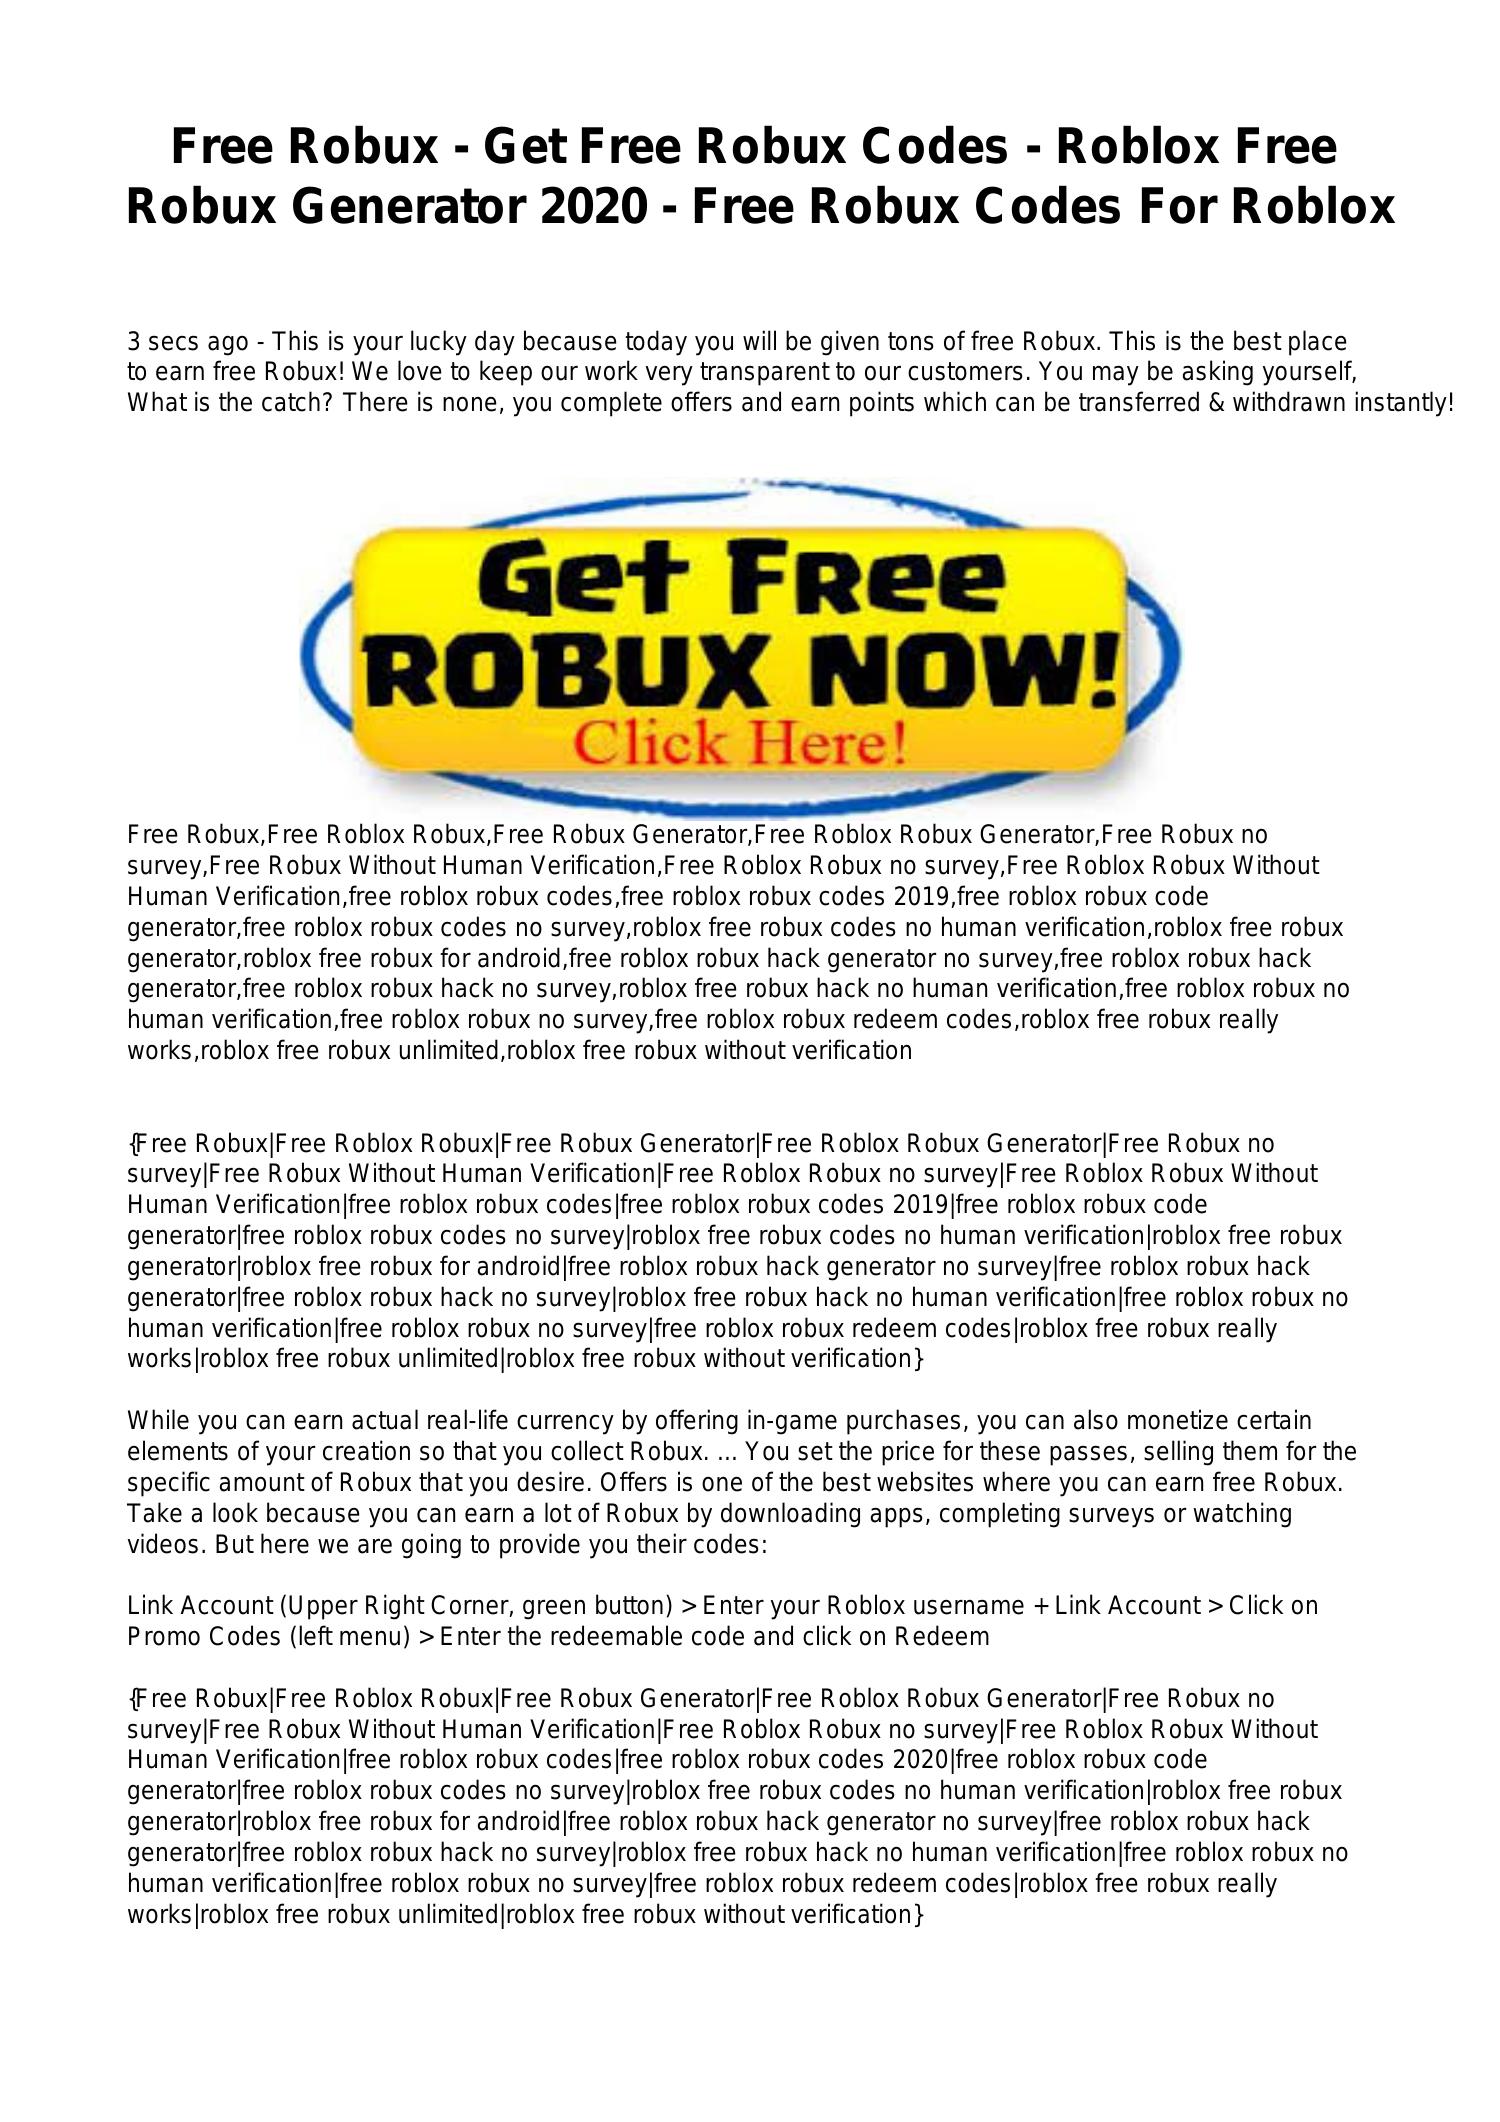 Promo Codes For Free Robux On Roblox 2020